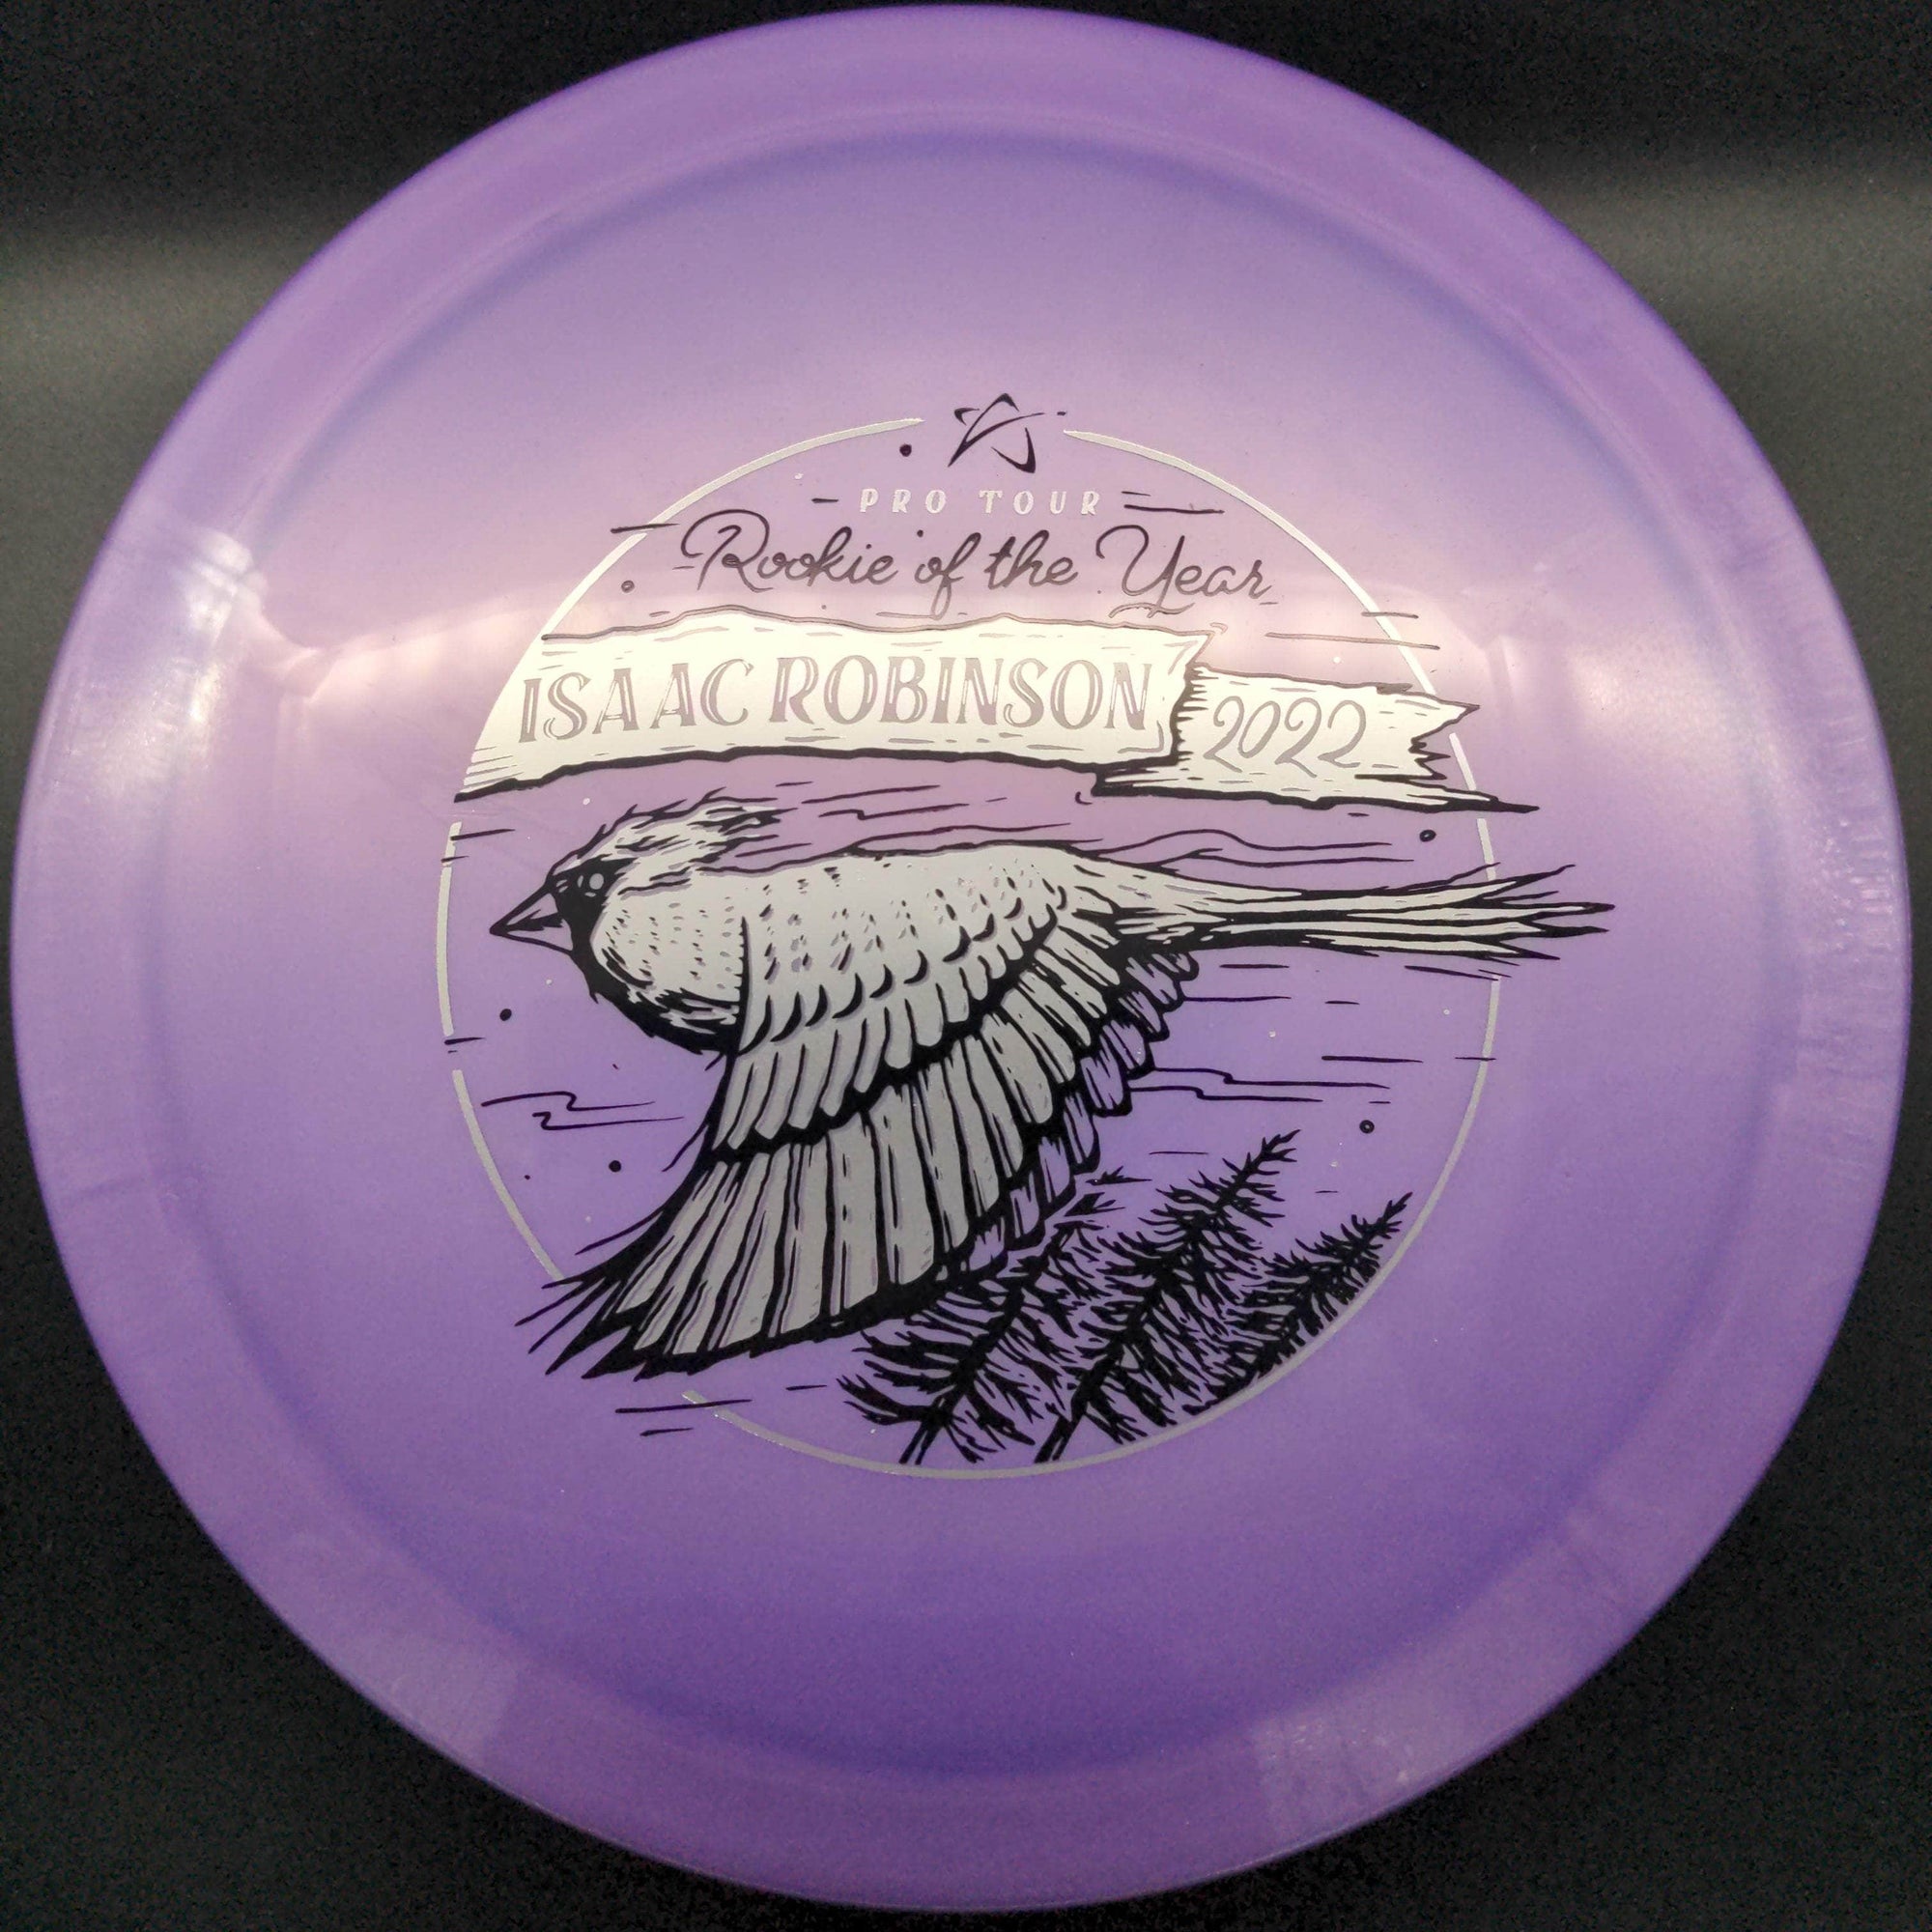 Prodigy Fairway Driver Purple Silver Stamp 174g Fx4, 500 Plastic, Isaac Robinson Rookie Of the Year Stamp